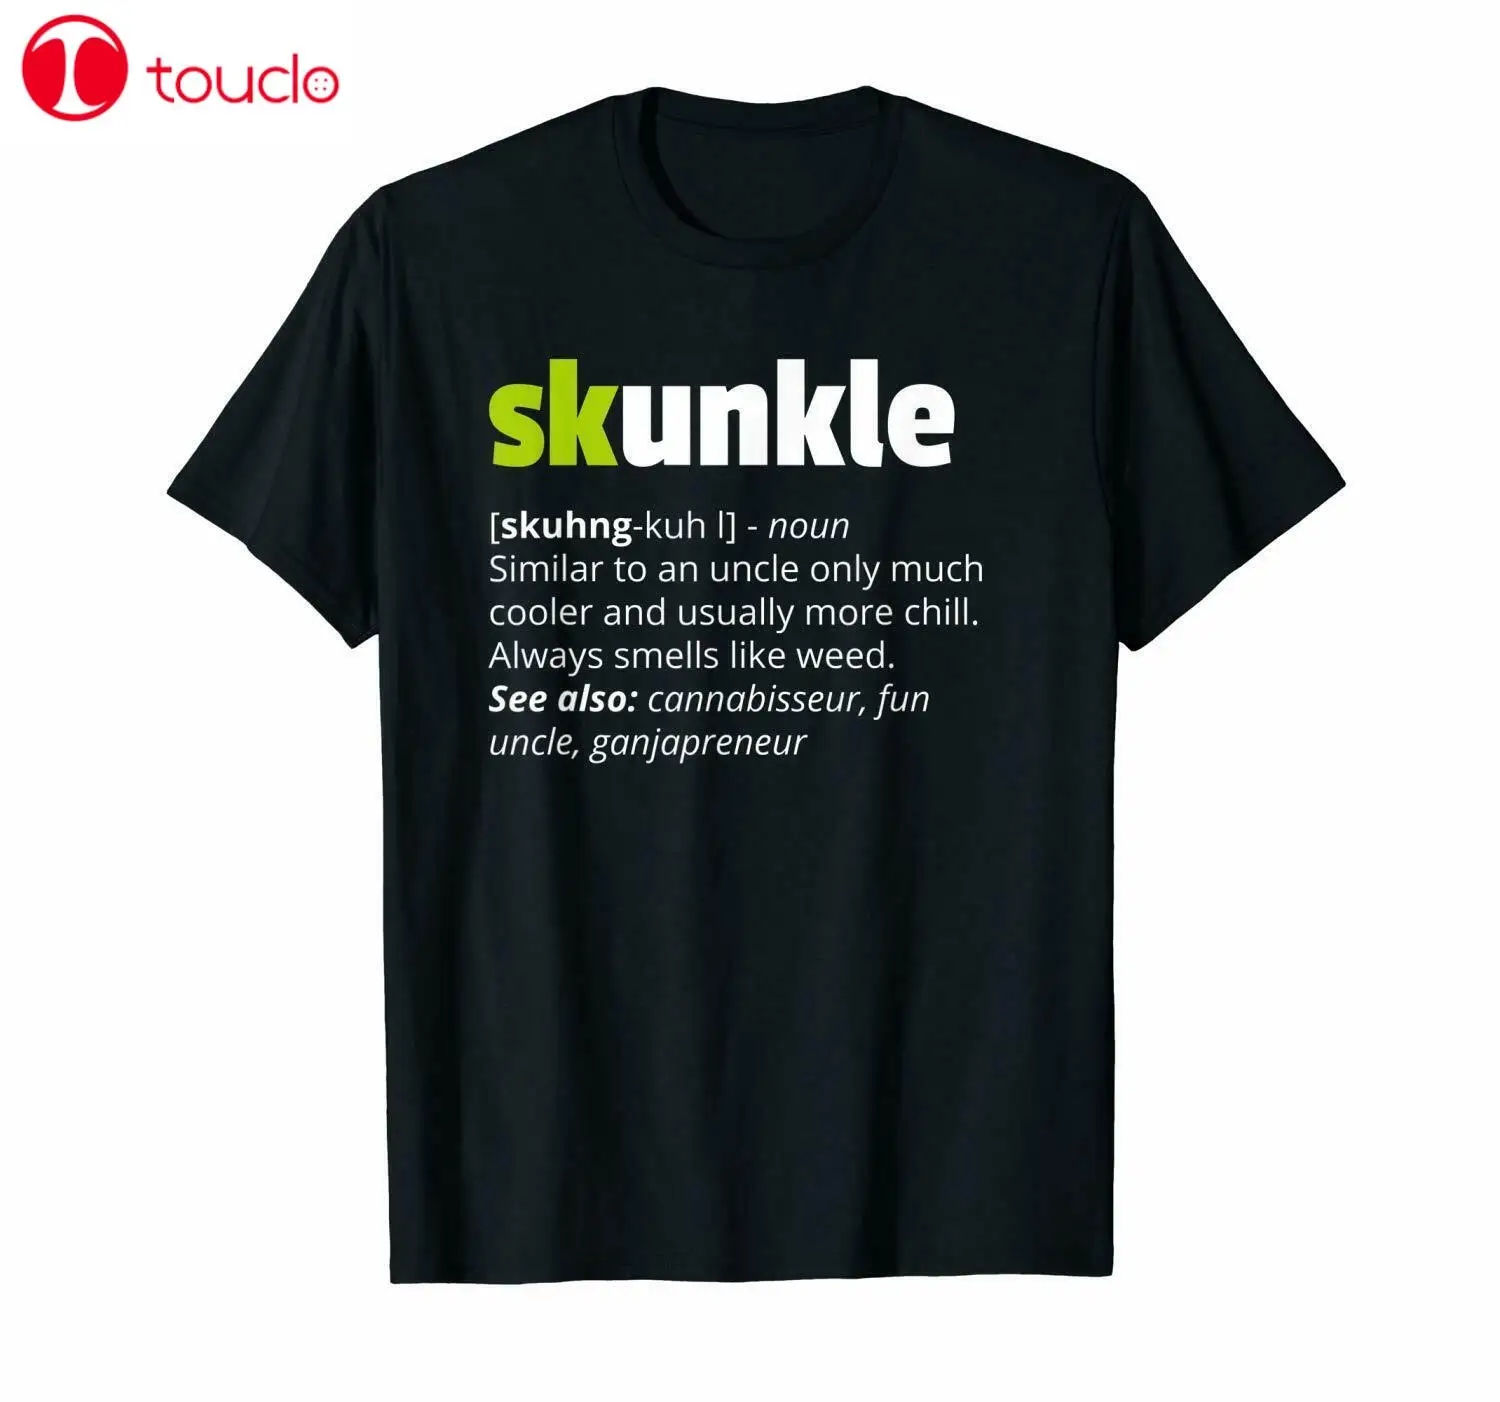 

Skunkle Definition An Uncle Only Much Cooler And Chill Funny Black T-Shirt S-6Xl Unisex Women Men Tee Shirt